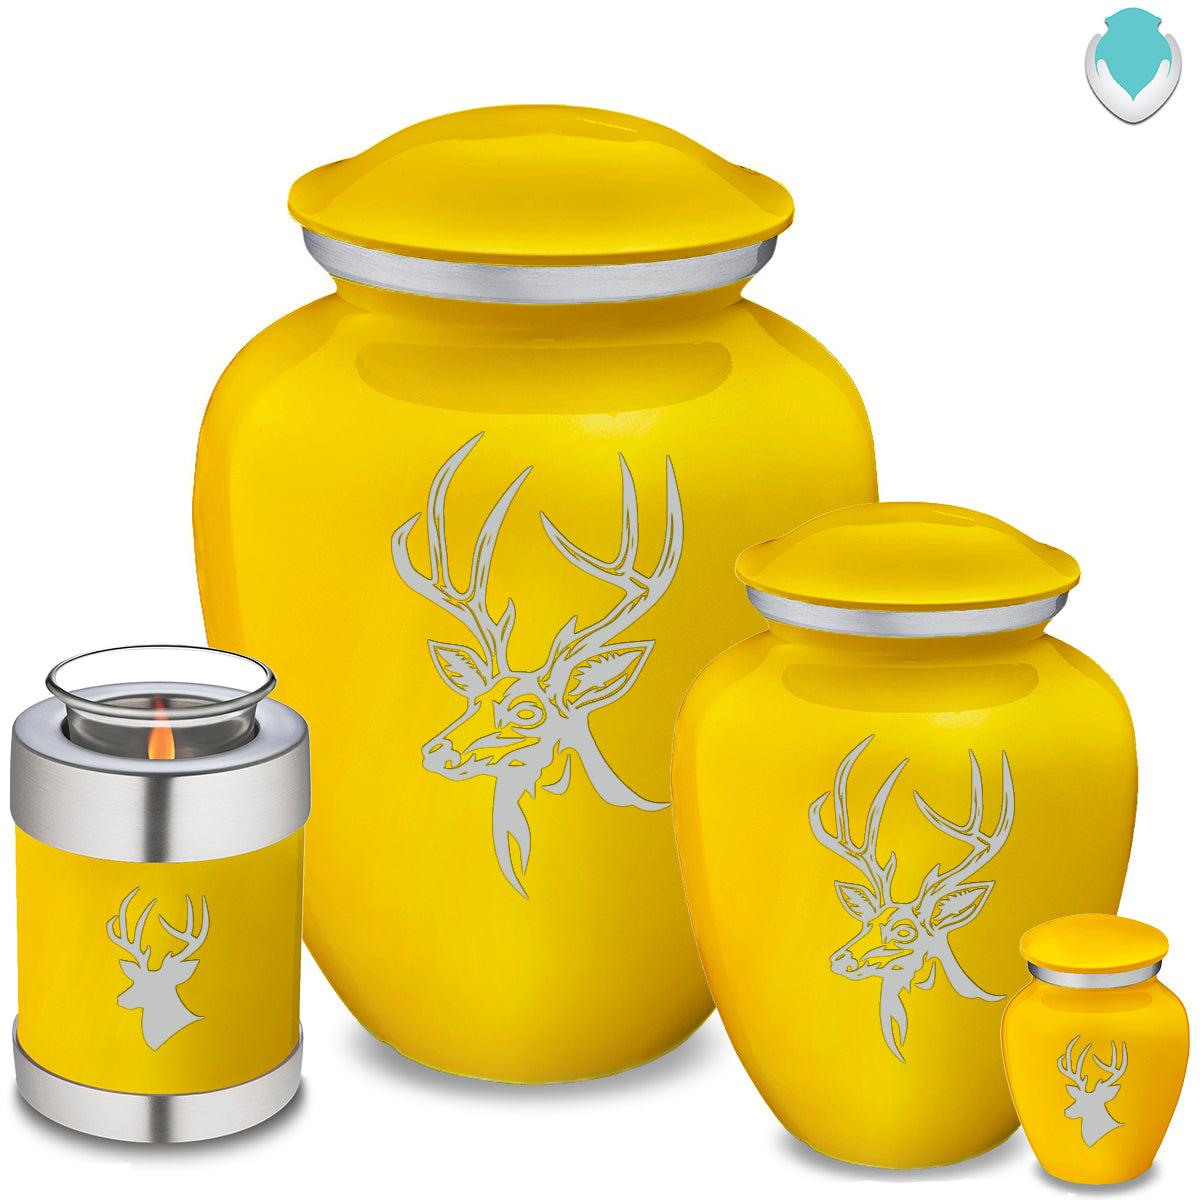 Adult Embrace Yellow Deer Cremation Urn